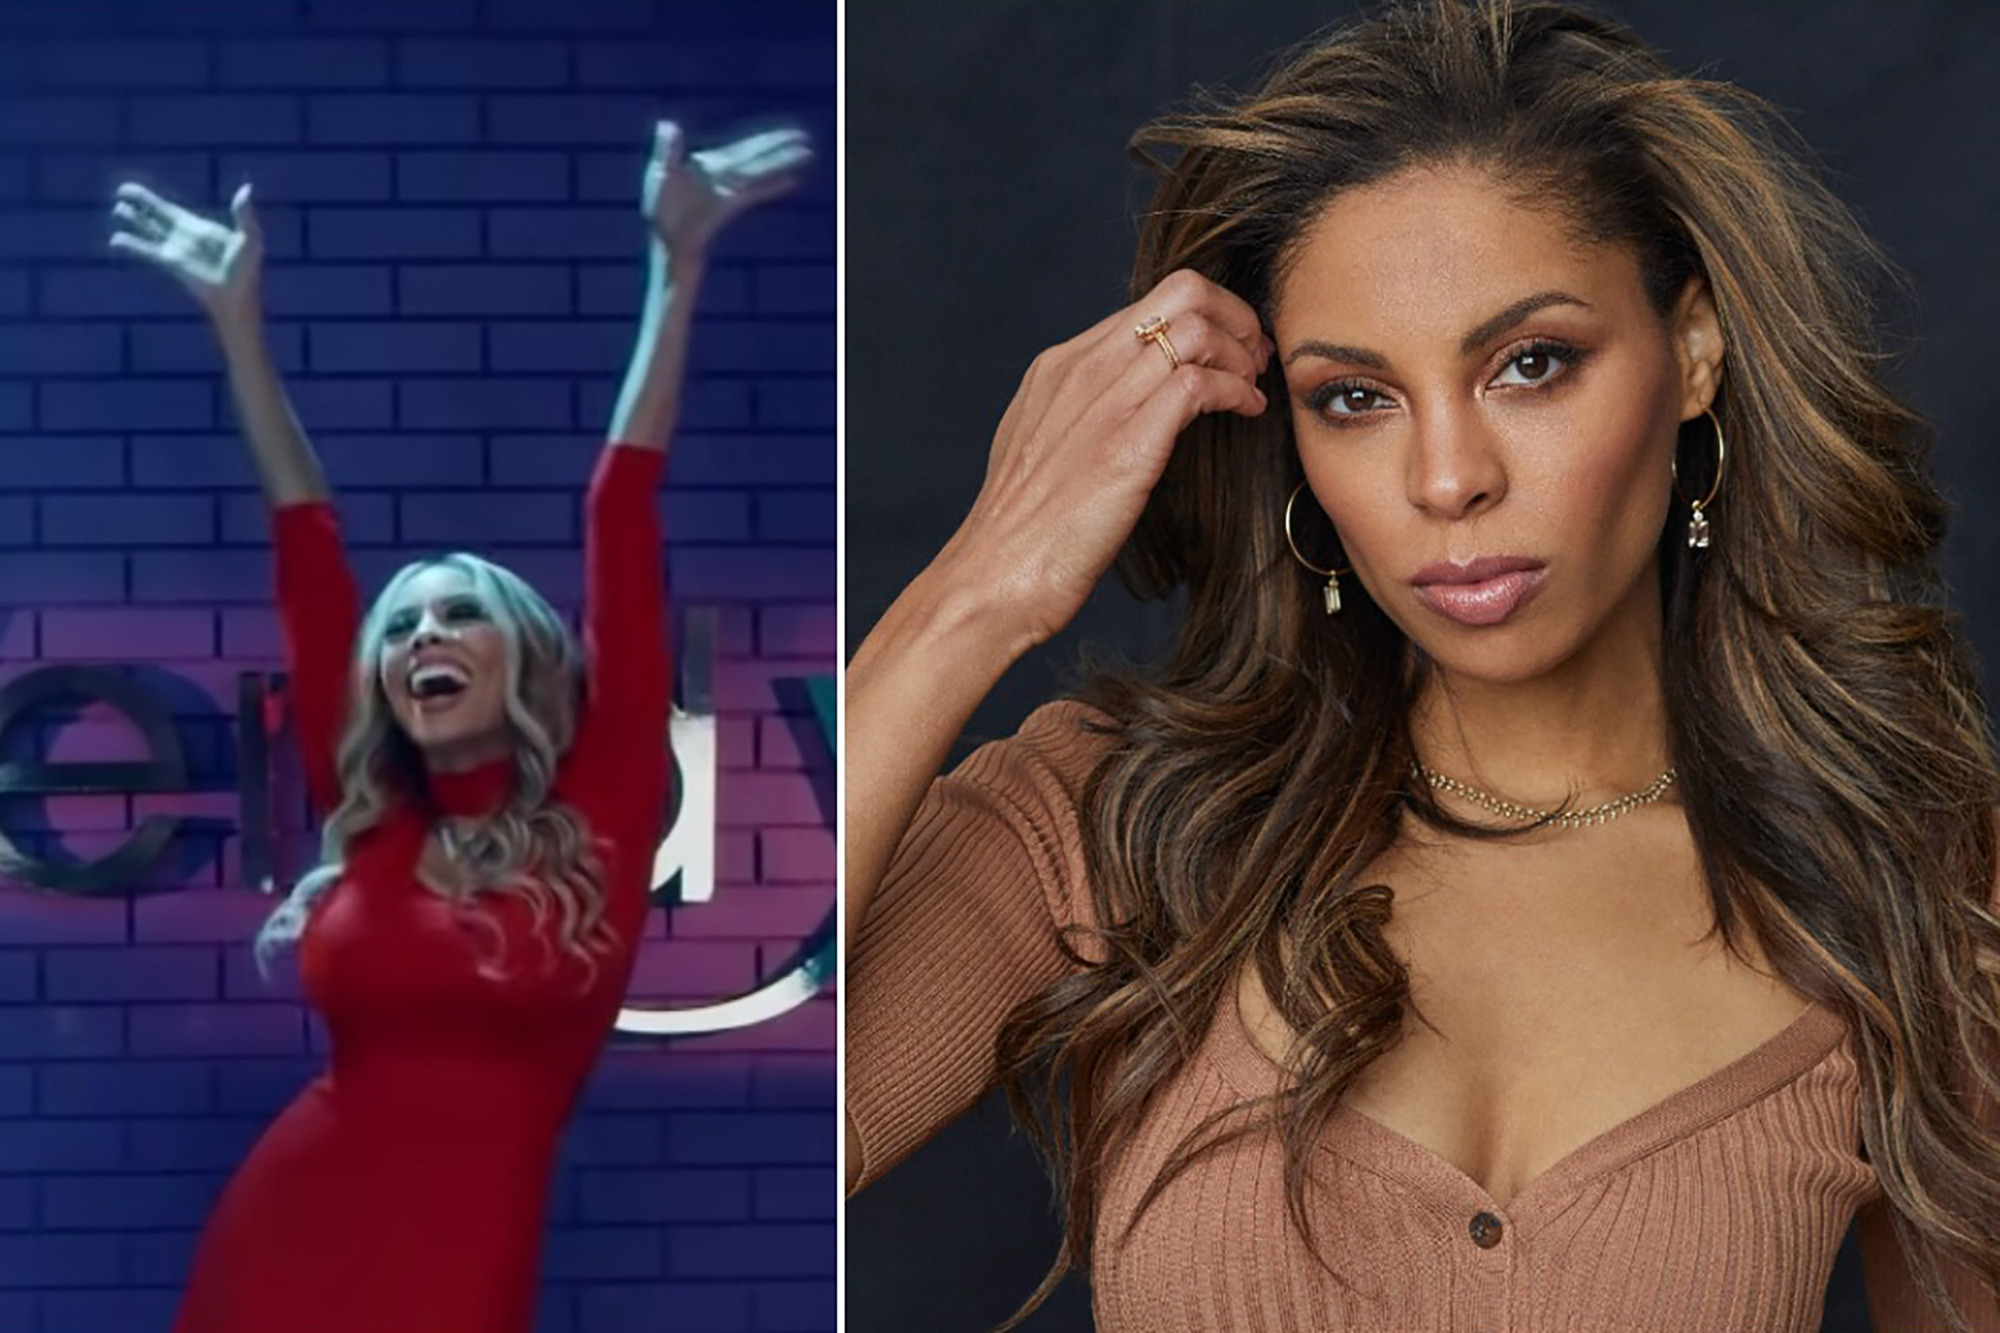 andrew weaks recommends how big are wendy williams tits pic